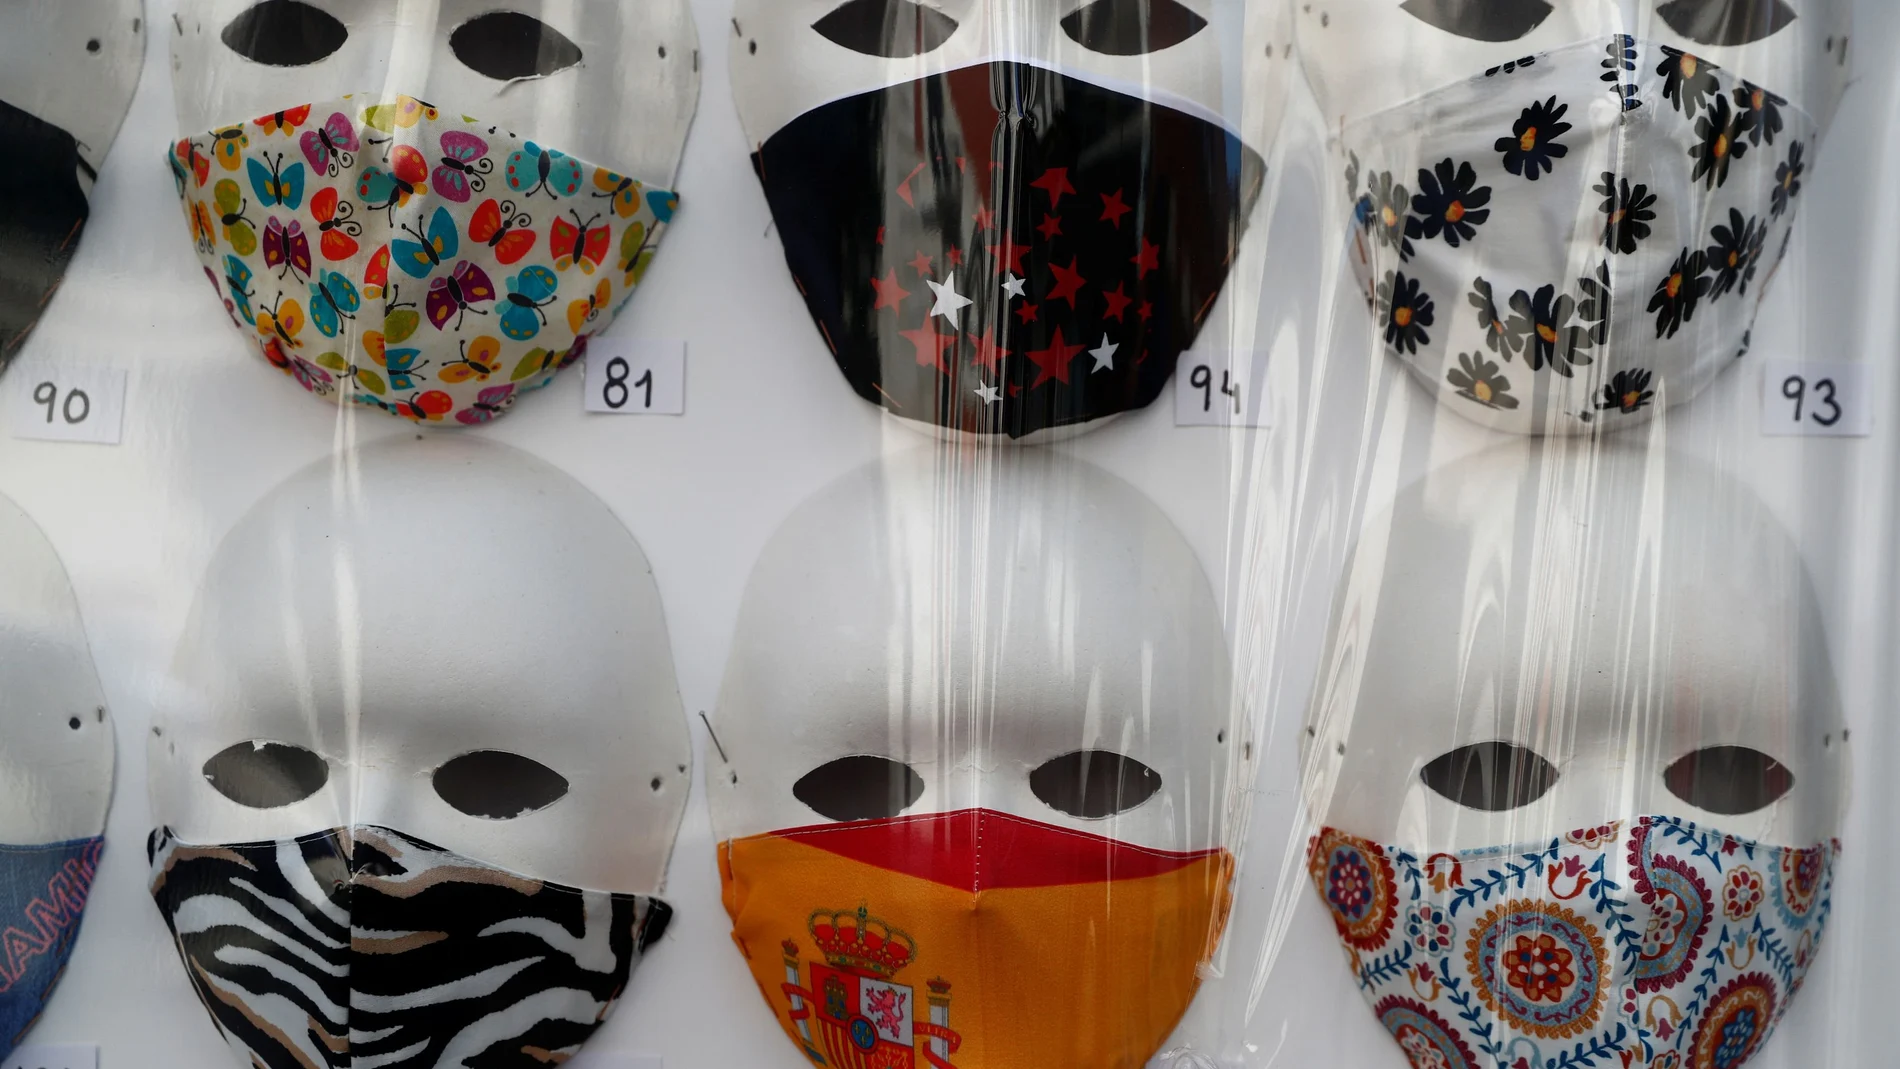 Protective masks are displayed in a store, amid the coronavirus disease (COVID-19) outbreak, in Madrid, Spain, June 30, 2020. REUTERS/Susana Vera